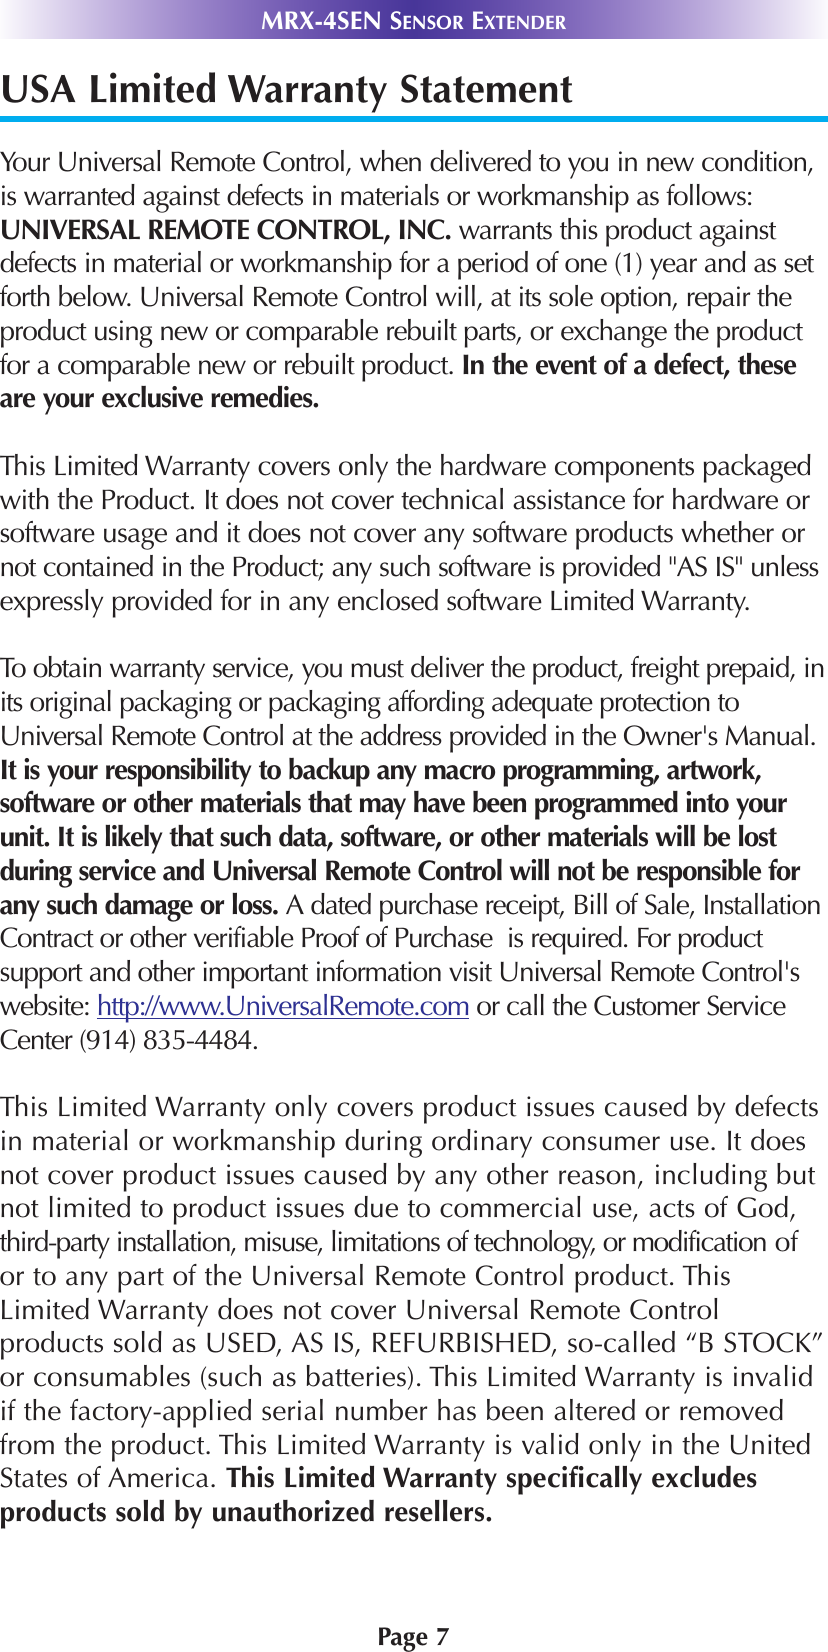 Page 7MRX-4SEN SENSOR EXTENDERUSA Limited Warranty StatementYour Universal Remote Control, when delivered to you in new condition,is warranted against defects in materials or workmanship as follows:UNIVERSAL REMOTE CONTROL, INC. warrants this product againstdefects in material or workmanship for a period of one (1) year and as setforth below. Universal Remote Control will, at its sole option, repair theproduct using new or comparable rebuilt parts, or exchange the productfor a comparable new or rebuilt product. In the event of a defect, theseare your exclusive remedies.This Limited Warranty covers only the hardware components packagedwith the Product. It does not cover technical assistance for hardware orsoftware usage and it does not cover any software products whether ornot contained in the Product; any such software is provided &quot;AS IS&quot; unlessexpressly provided for in any enclosed software Limited Warranty. To obtain warranty service, you must deliver the product, freight prepaid, inits original packaging or packaging affording adequate protection toUniversal Remote Control at the address provided in the Owner&apos;s Manual.It is your responsibility to backup any macro programming, artwork,software or other materials that may have been programmed into yourunit. It is likely that such data, software, or other materials will be lostduring service and Universal Remote Control will not be responsible forany such damage or loss. A dated purchase receipt, Bill of Sale, InstallationContract or other verifiable Proof of Purchase  is required. For productsupport and other important information visit Universal Remote Control&apos;swebsite: http://www.UniversalRemote.com or call the Customer ServiceCenter (914) 835-4484. This Limited Warranty only covers product issues caused by defectsin material or workmanship during ordinary consumer use. It doesnot cover product issues caused by any other reason, including butnot limited to product issues due to commercial use, acts of God,third-party installation, misuse, limitations of technology, or modification ofor to any part of the Universal Remote Control product. ThisLimited Warranty does not cover Universal Remote Controlproducts sold as USED, AS IS, REFURBISHED, so-called “B STOCK”or consumables (such as batteries). This Limited Warranty is invalidif the factory-applied serial number has been altered or removedfrom the product. This Limited Warranty is valid only in the UnitedStates of America. This Limited Warranty specifically excludesproducts sold by unauthorized resellers.